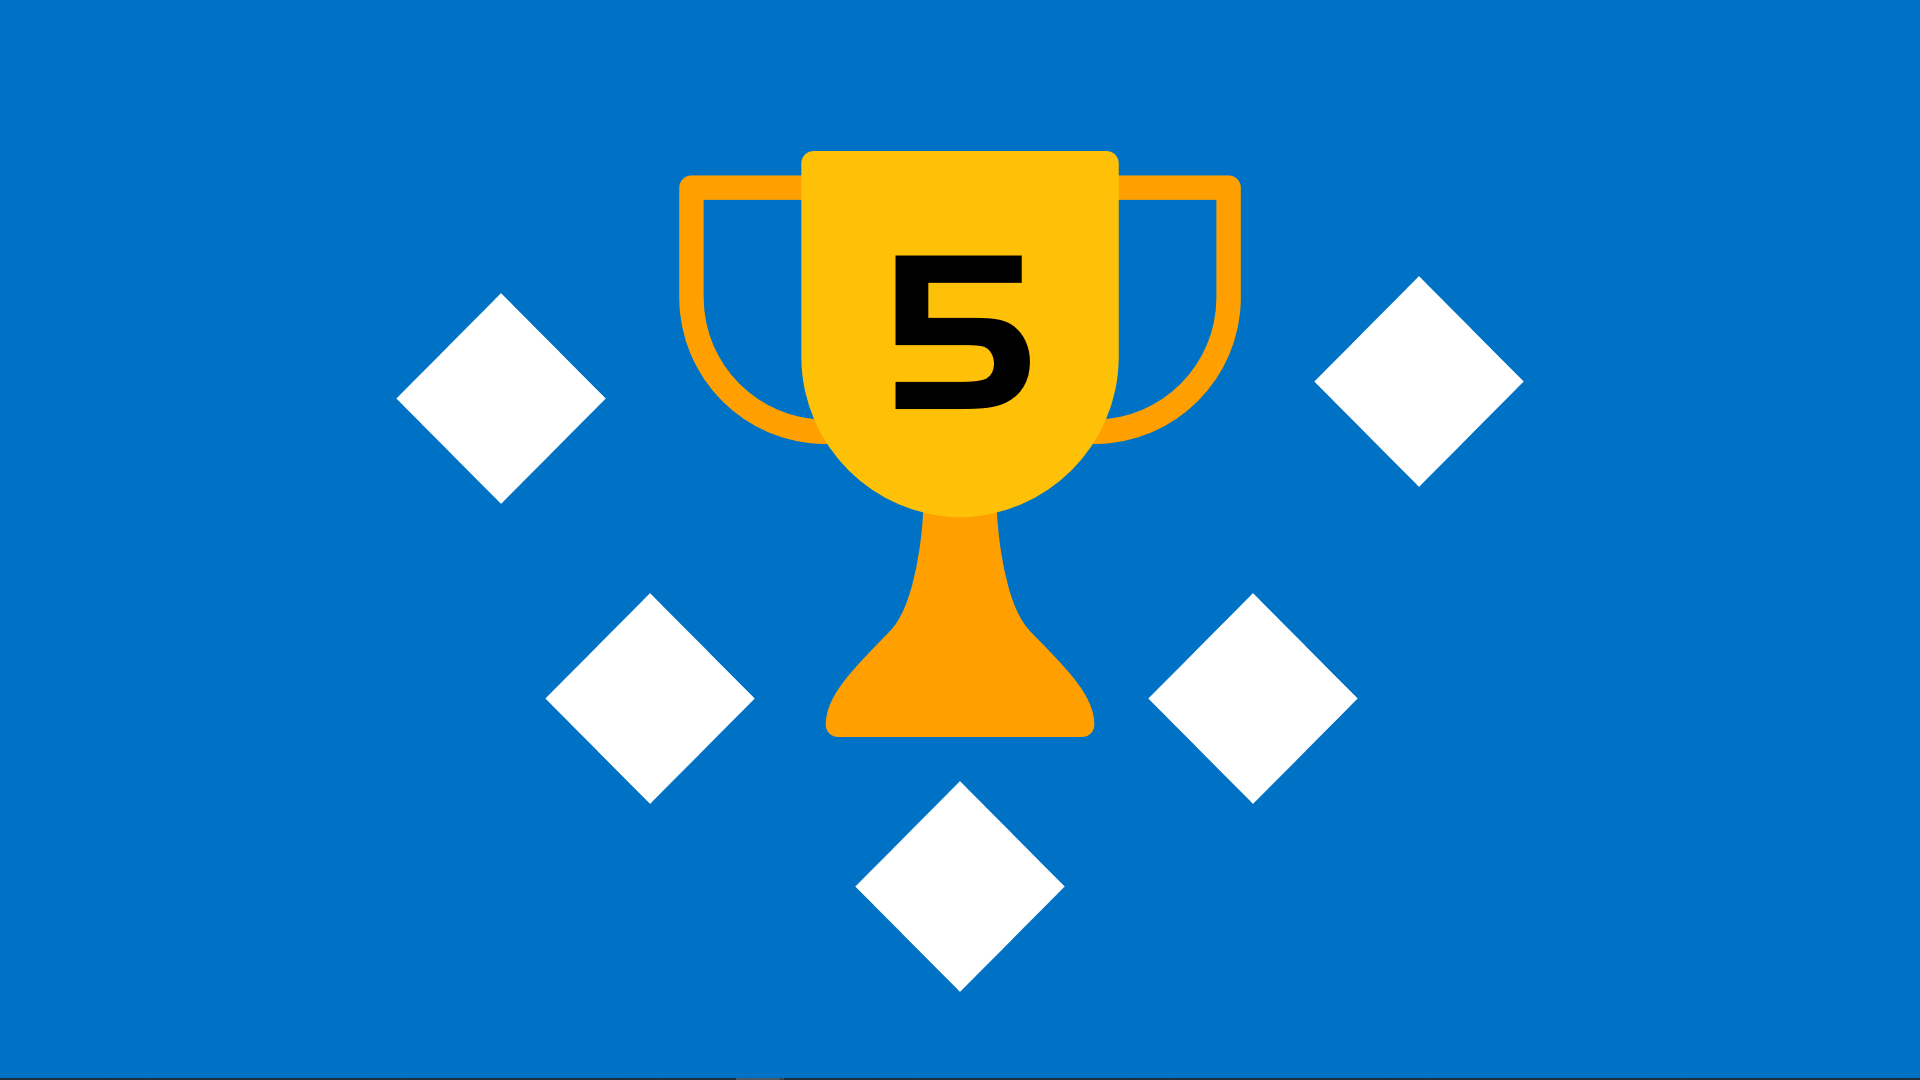 Recognized as a Microsoft MVP for the 5th time